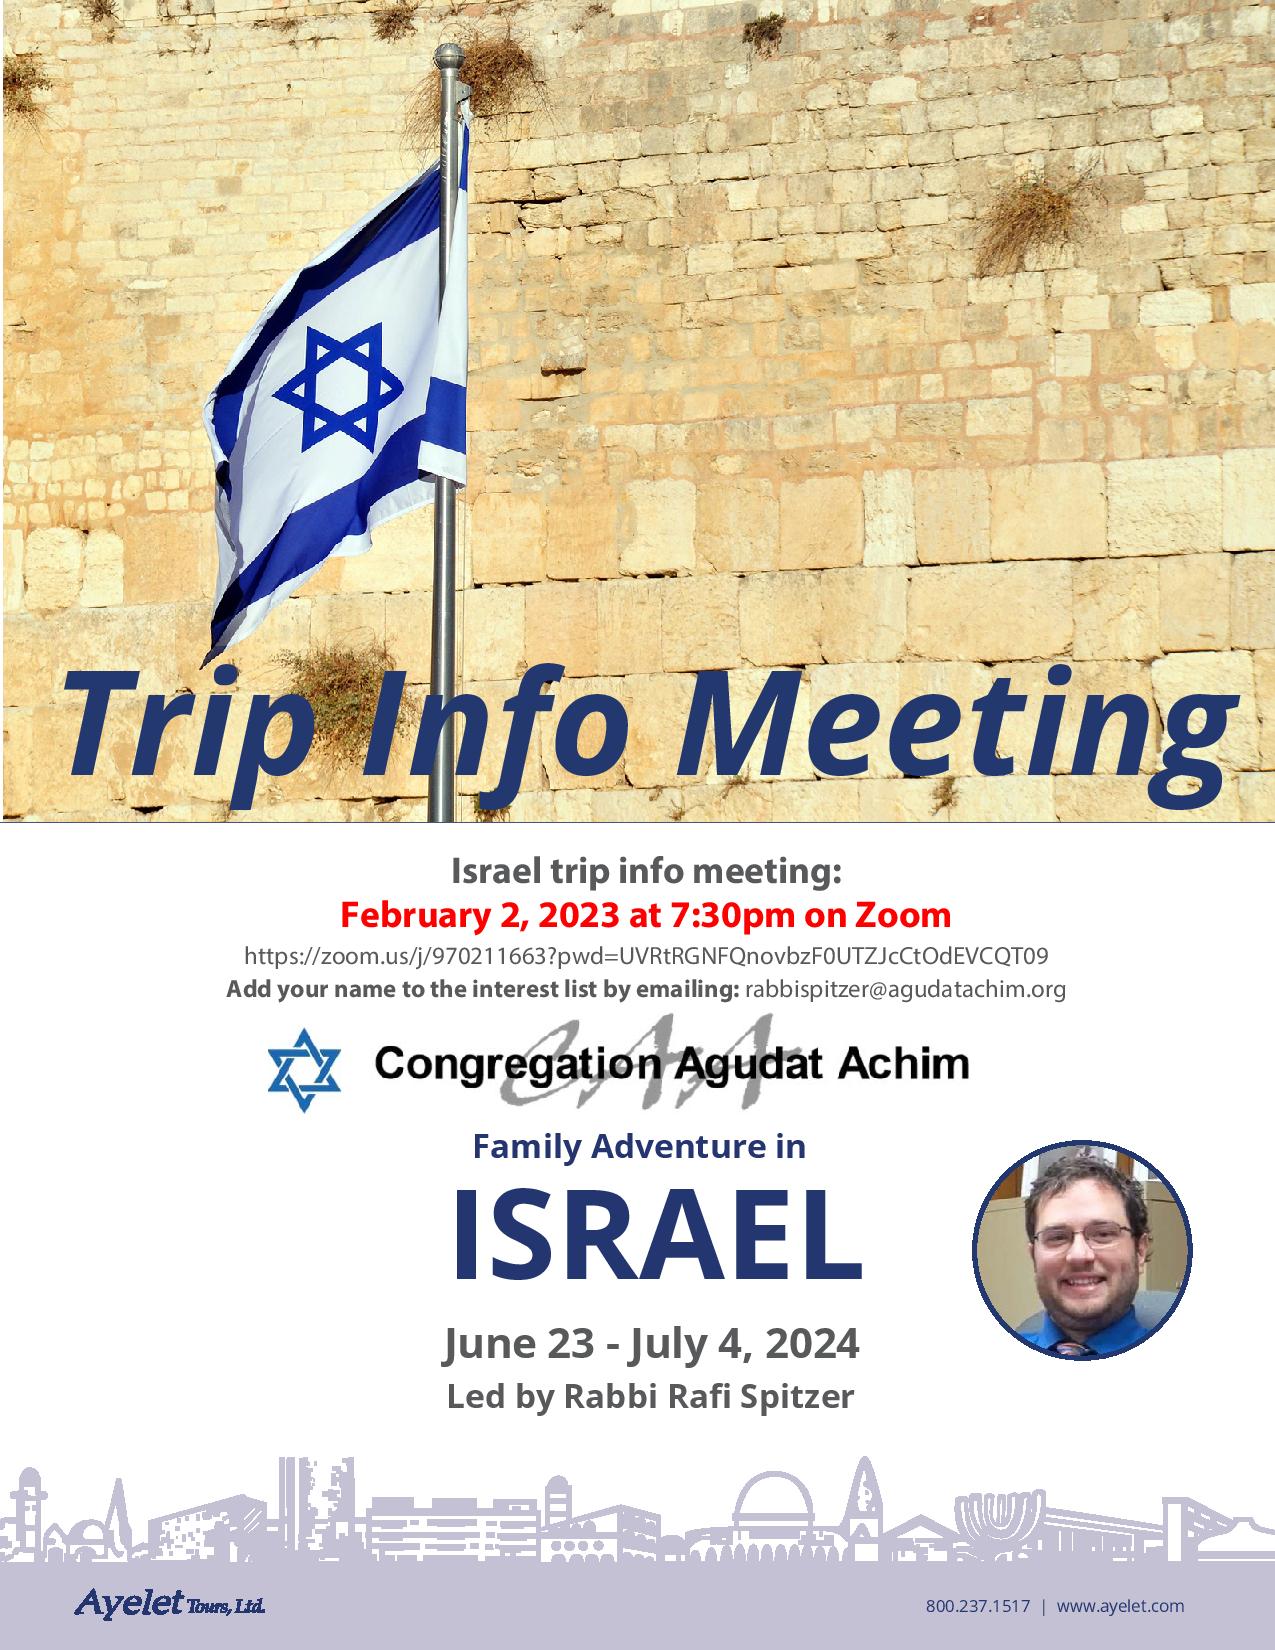 Our CAA Israel Trip Information Session